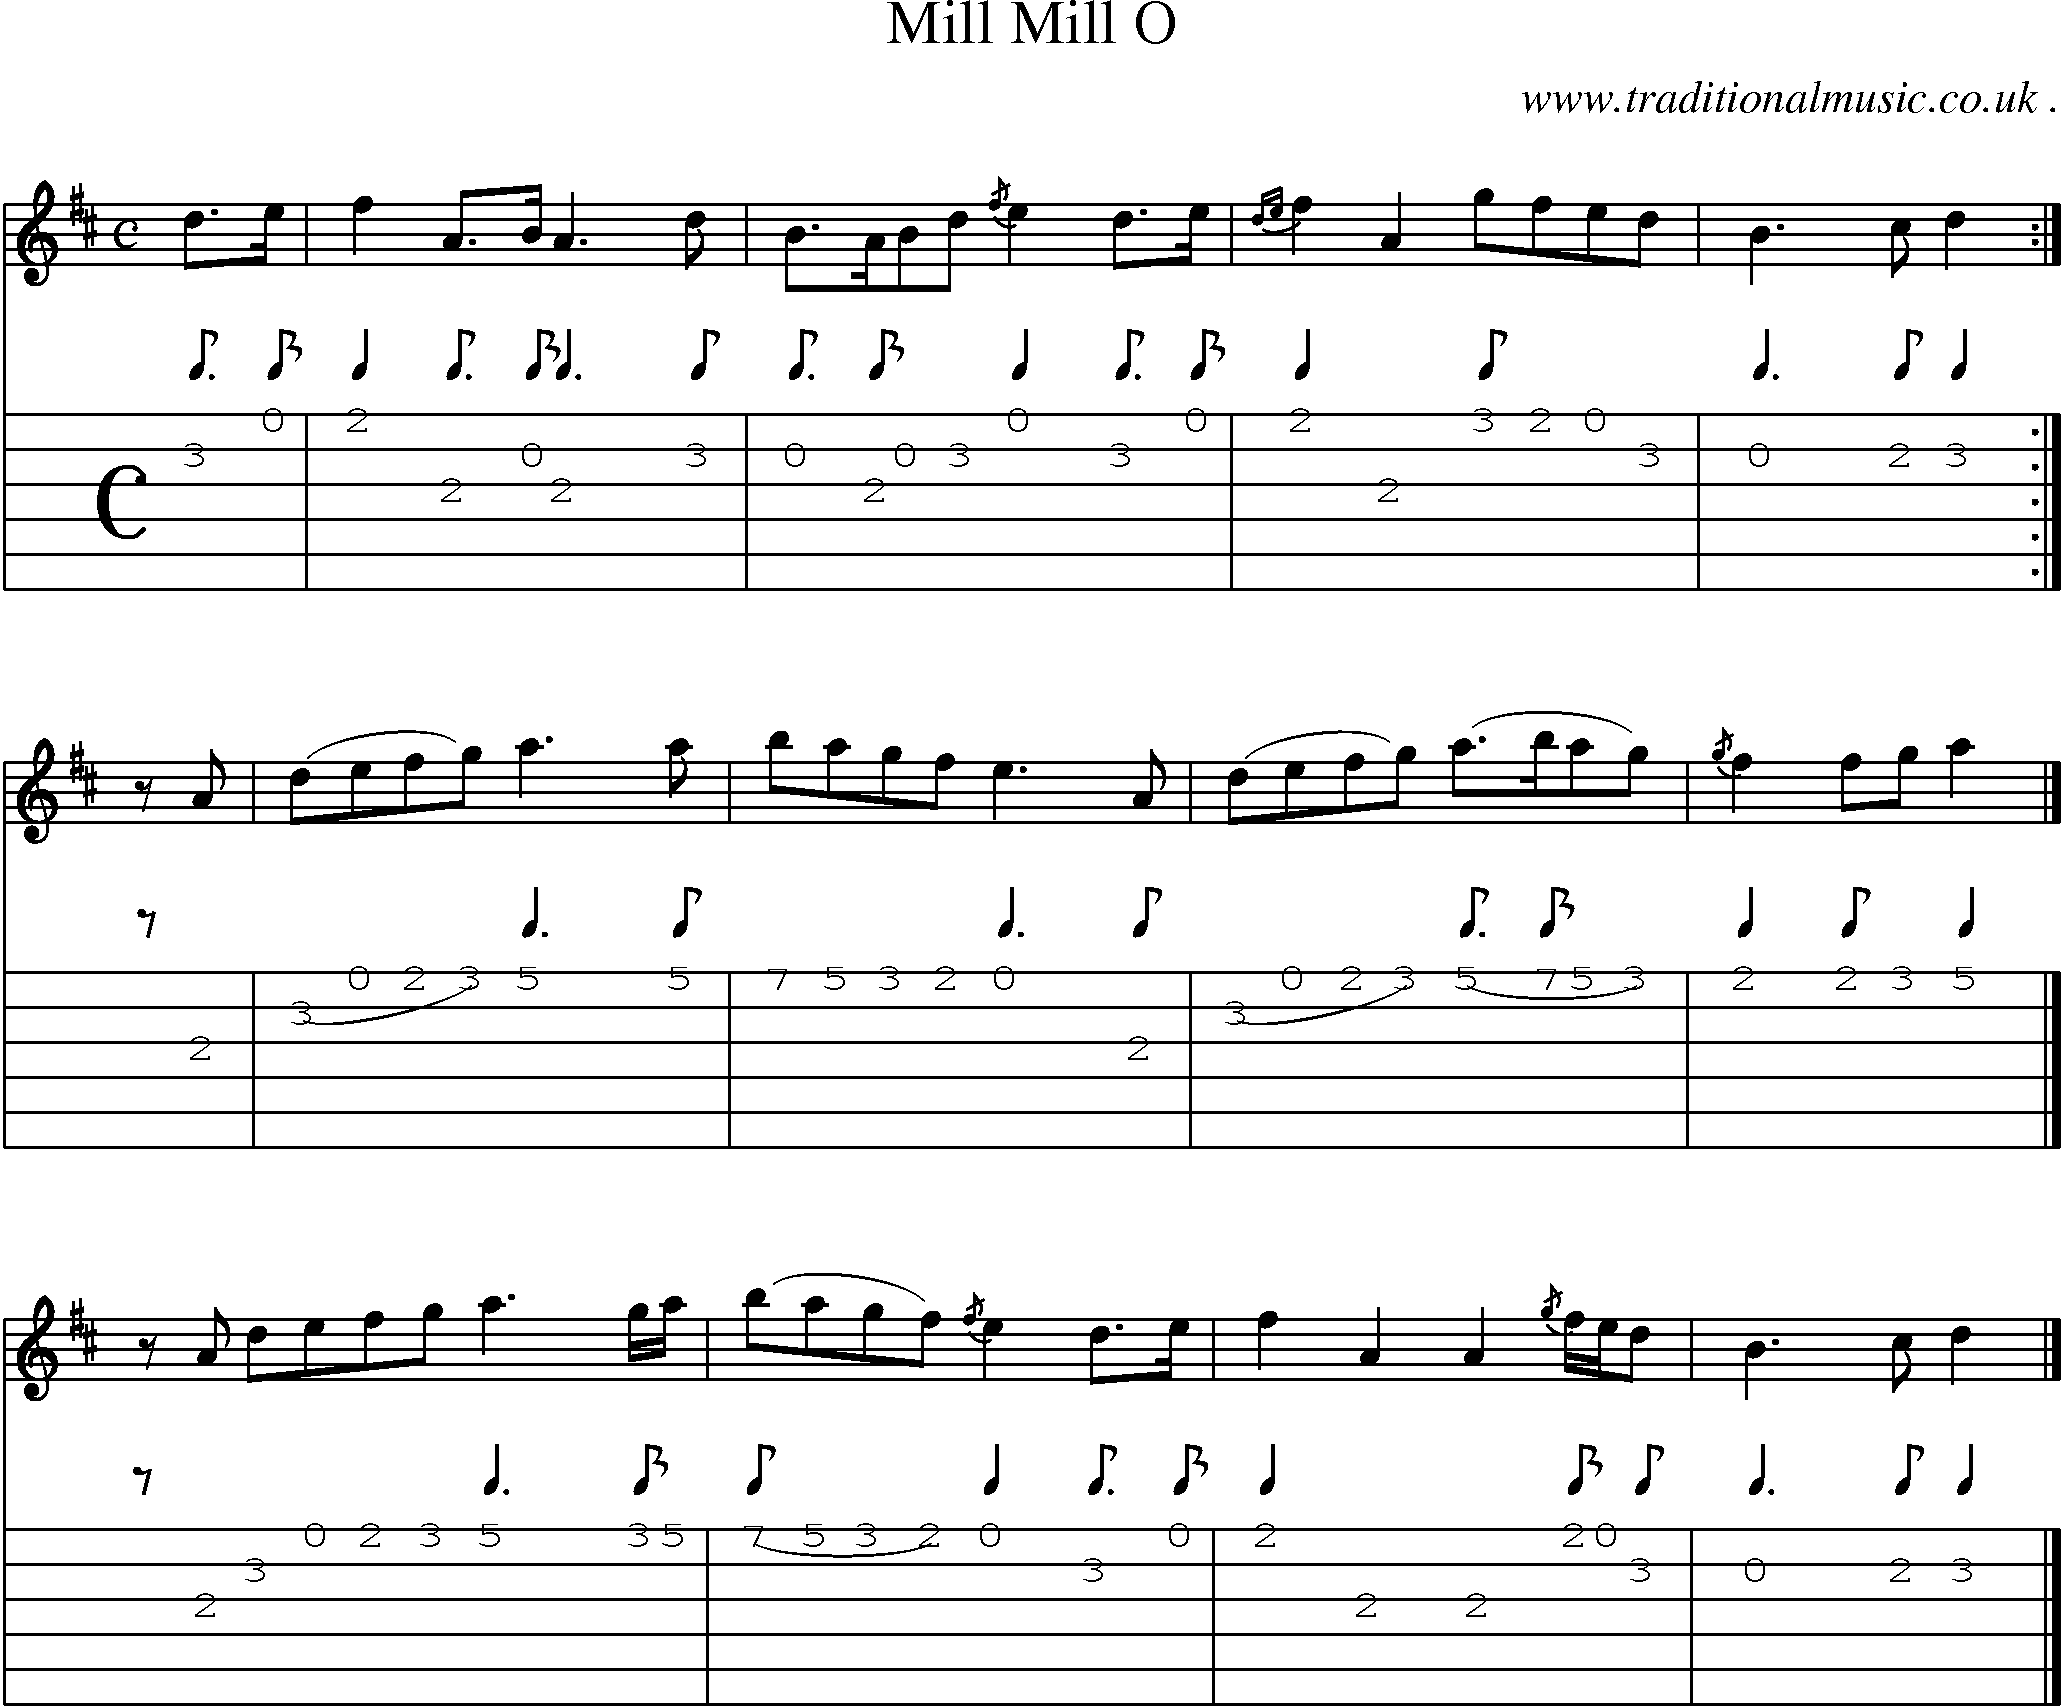 Sheet-music  score, Chords and Guitar Tabs for Mill Mill O